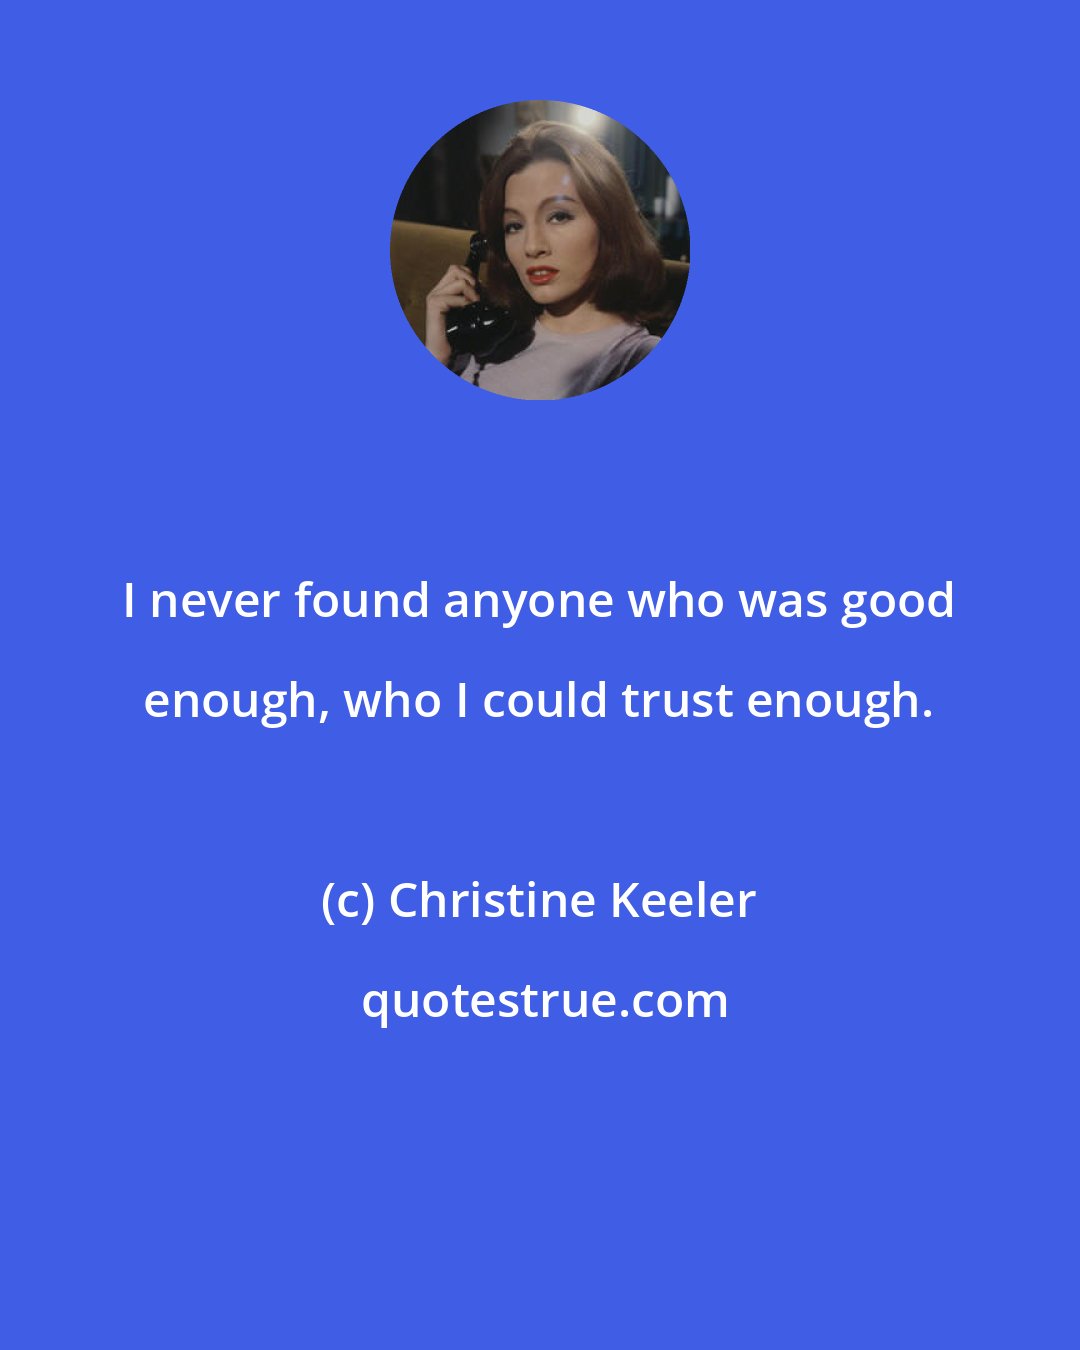 Christine Keeler: I never found anyone who was good enough, who I could trust enough.